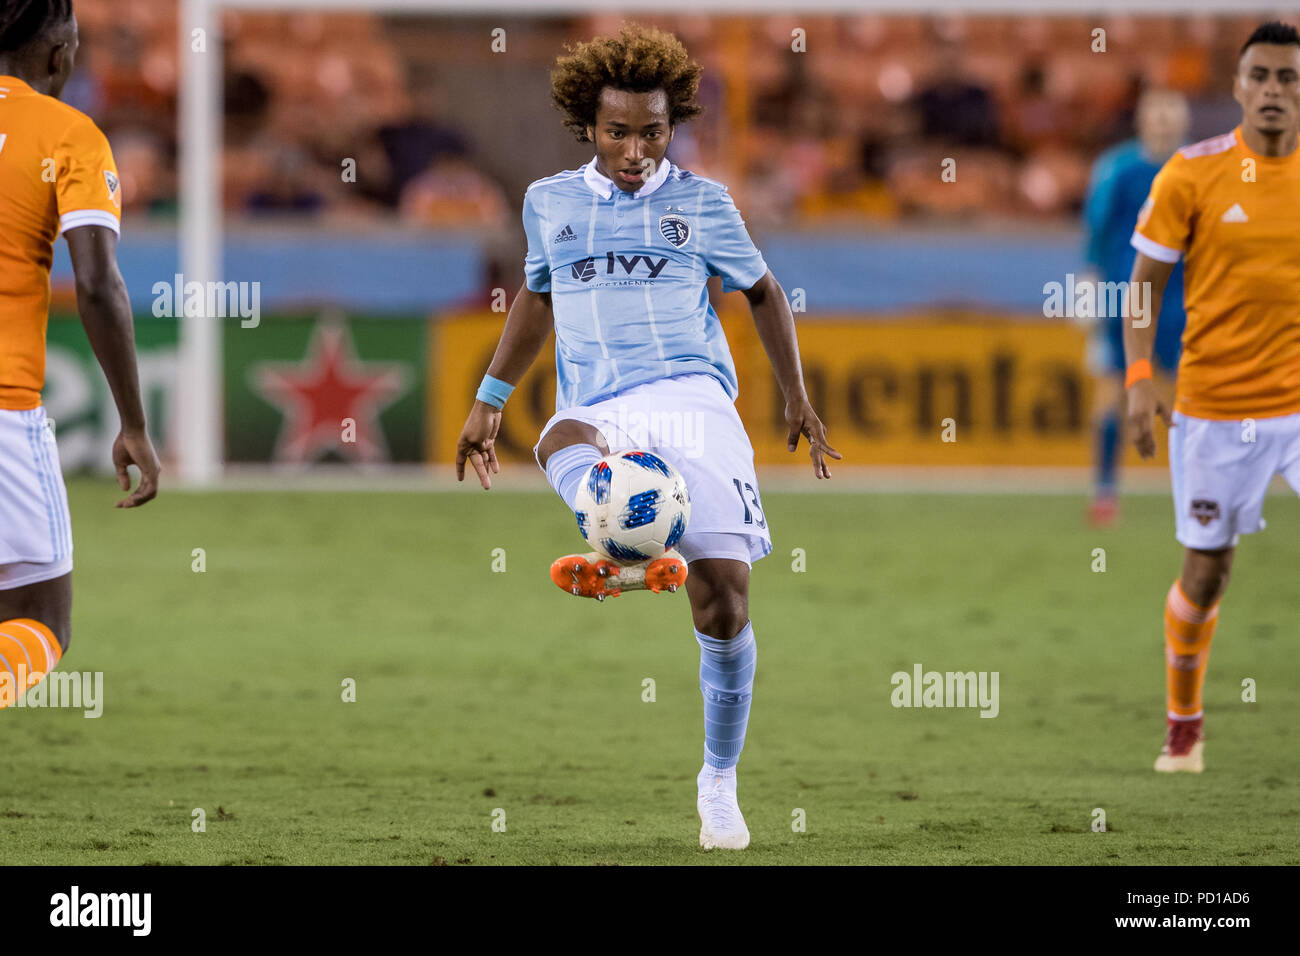 Houston, USA. 4 August 2018.  16 year old Sporting KC midfielder Gianluca Busio (13) controls the ball during an MLS soccer match between the Houston Dynamo and Sporting Kansas City at BBVA Compass Stadium in Houston, TX. Busio became the third-youngest player to ever start an MLS game. Kansas City won the match 1 to 0.Trask Smith/CSM Credit: Cal Sport Media/Alamy Live News Stock Photo